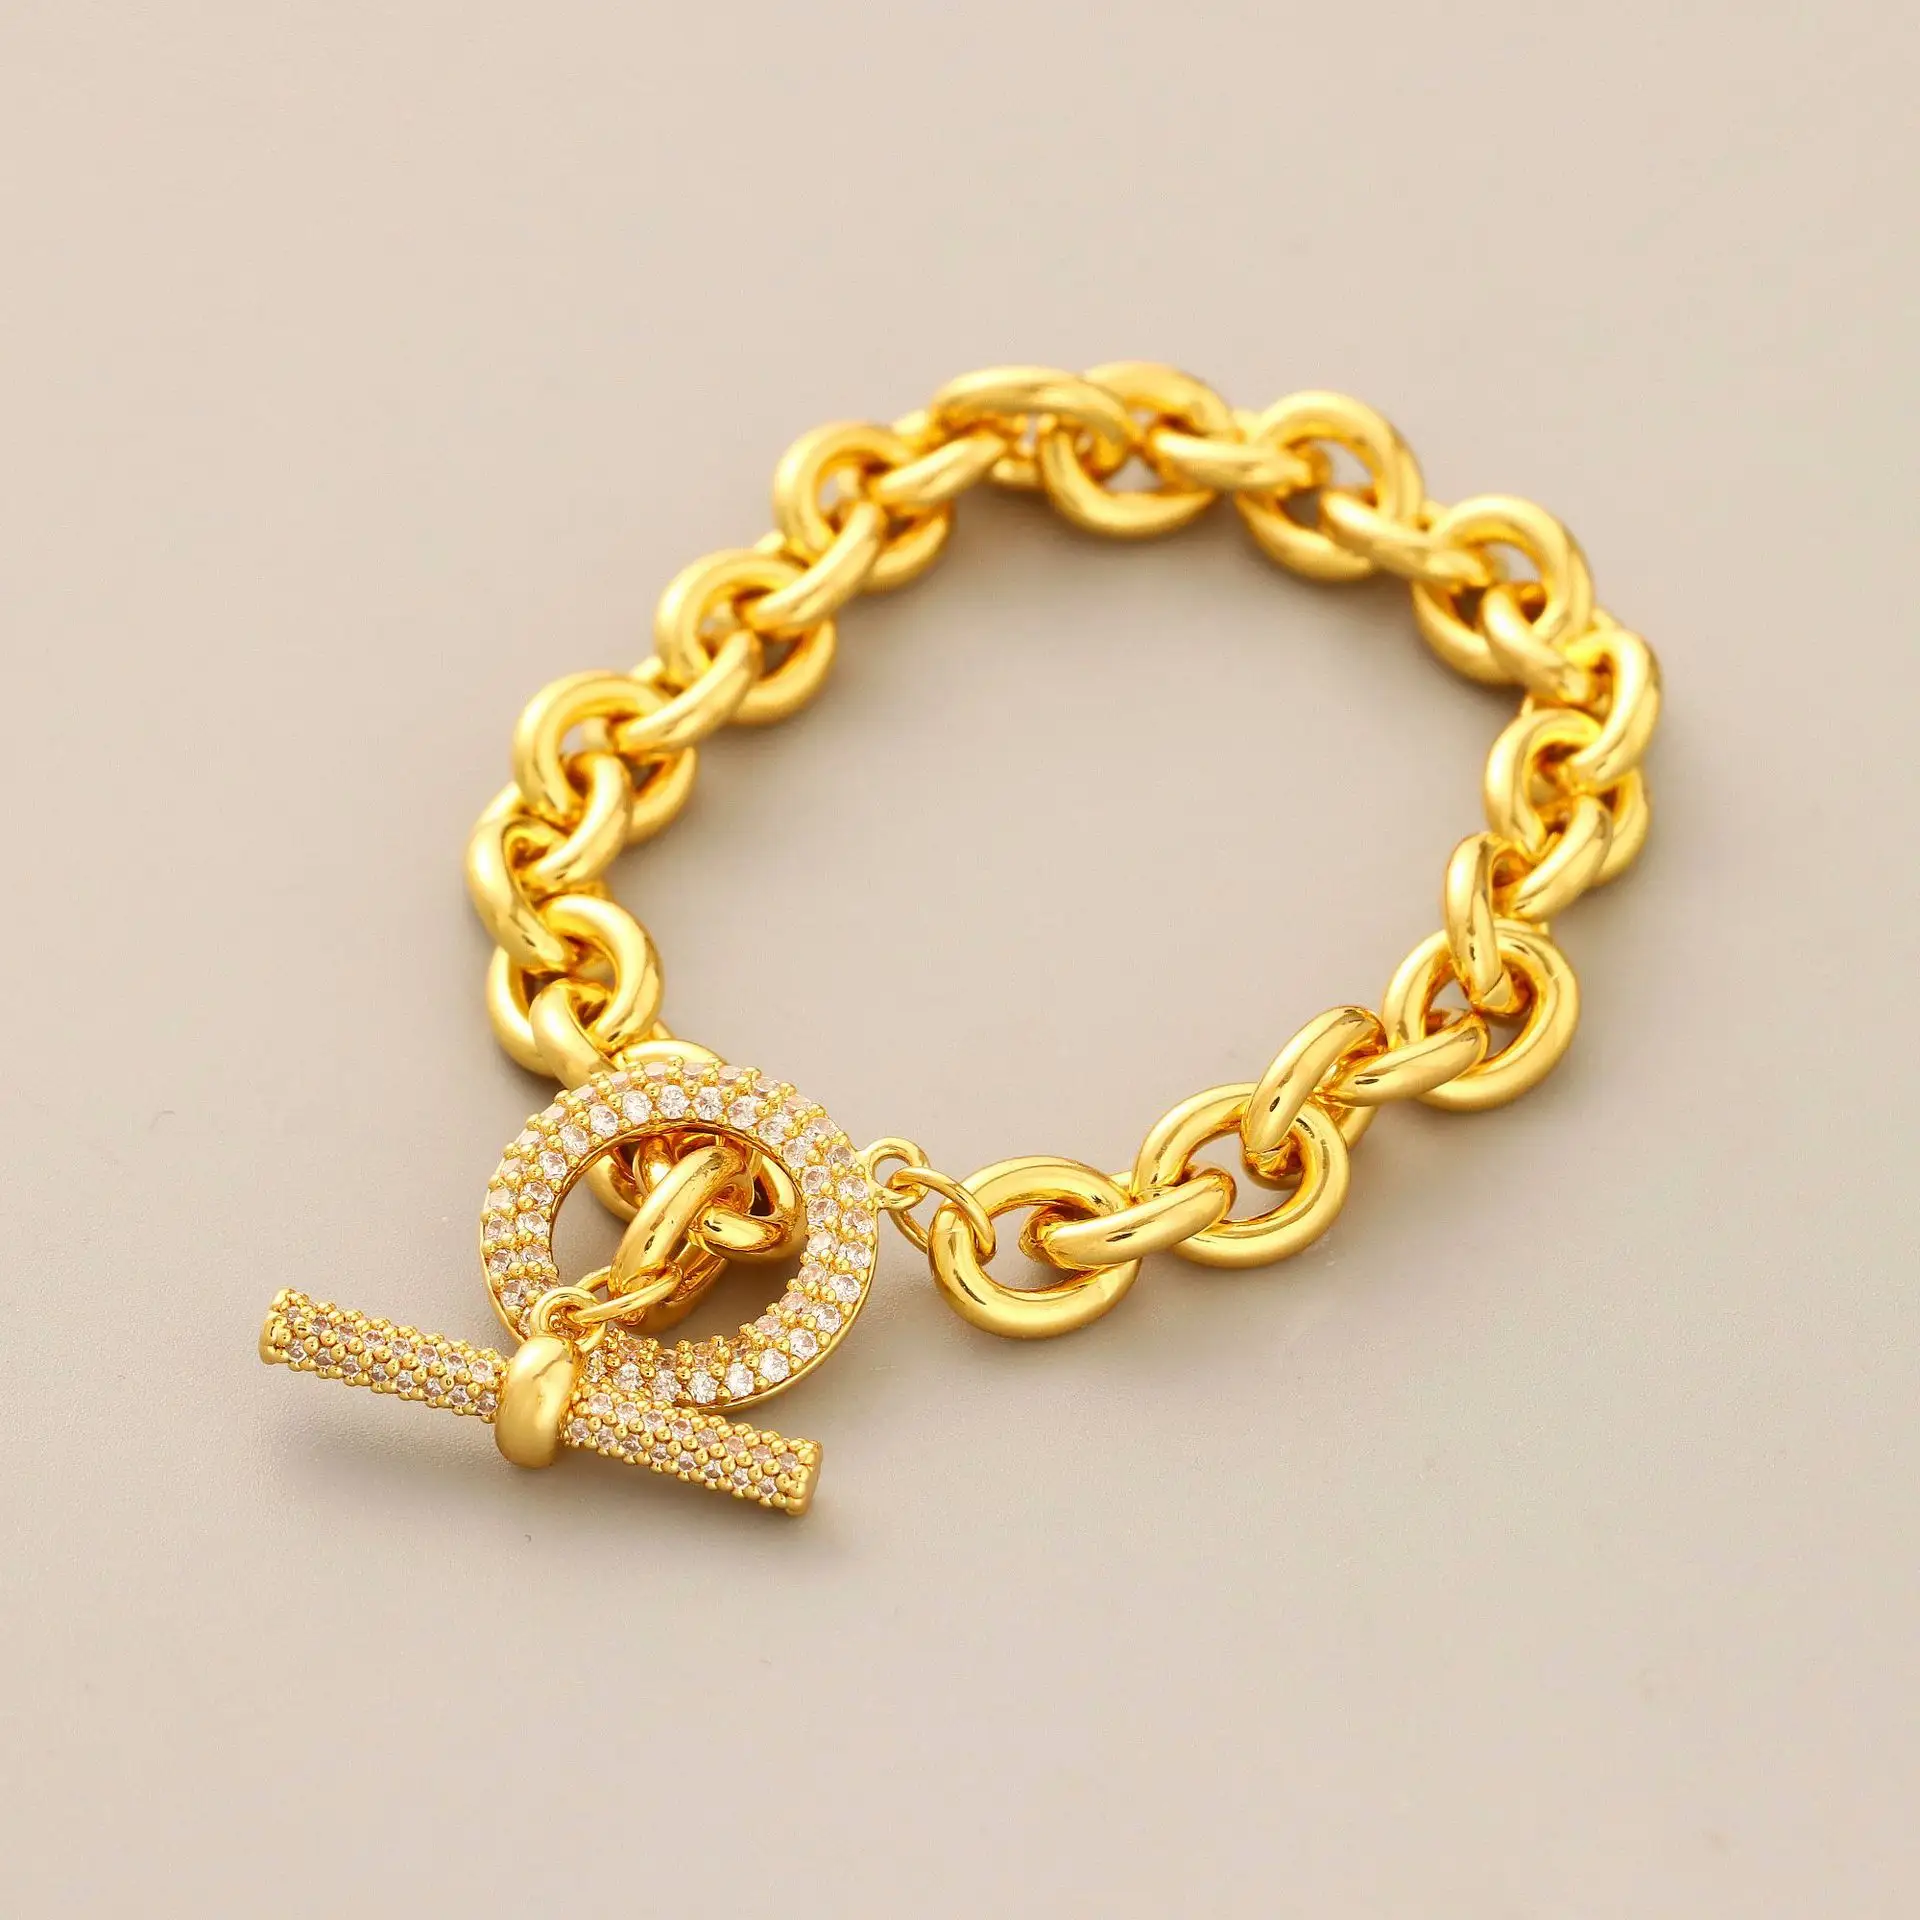 Minstone Unique Design High Quality 18k Micron Gold Plated Jewelry Zircon Diamond Chain Handmade Bracelet for Women Holiday Gift